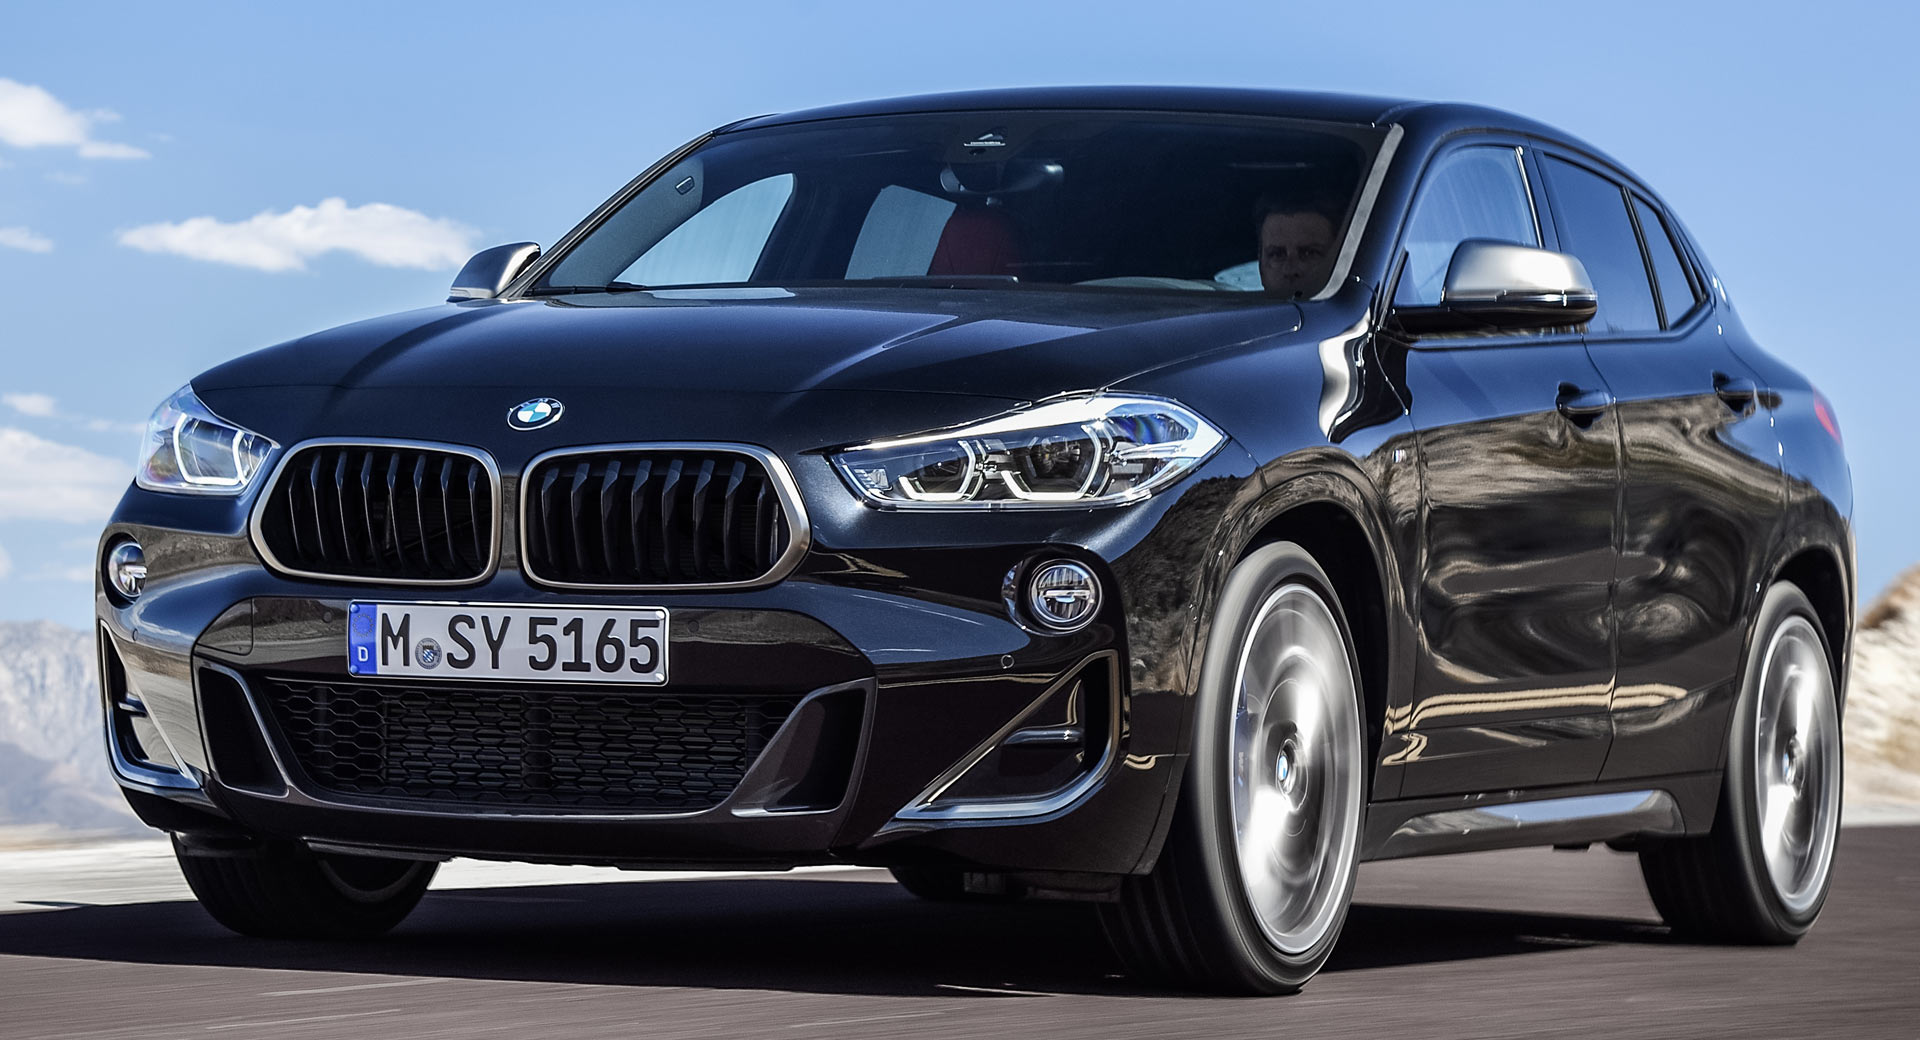 2019 BMW X2 M35i Combines 302 HP With A Hatchback-Like Body